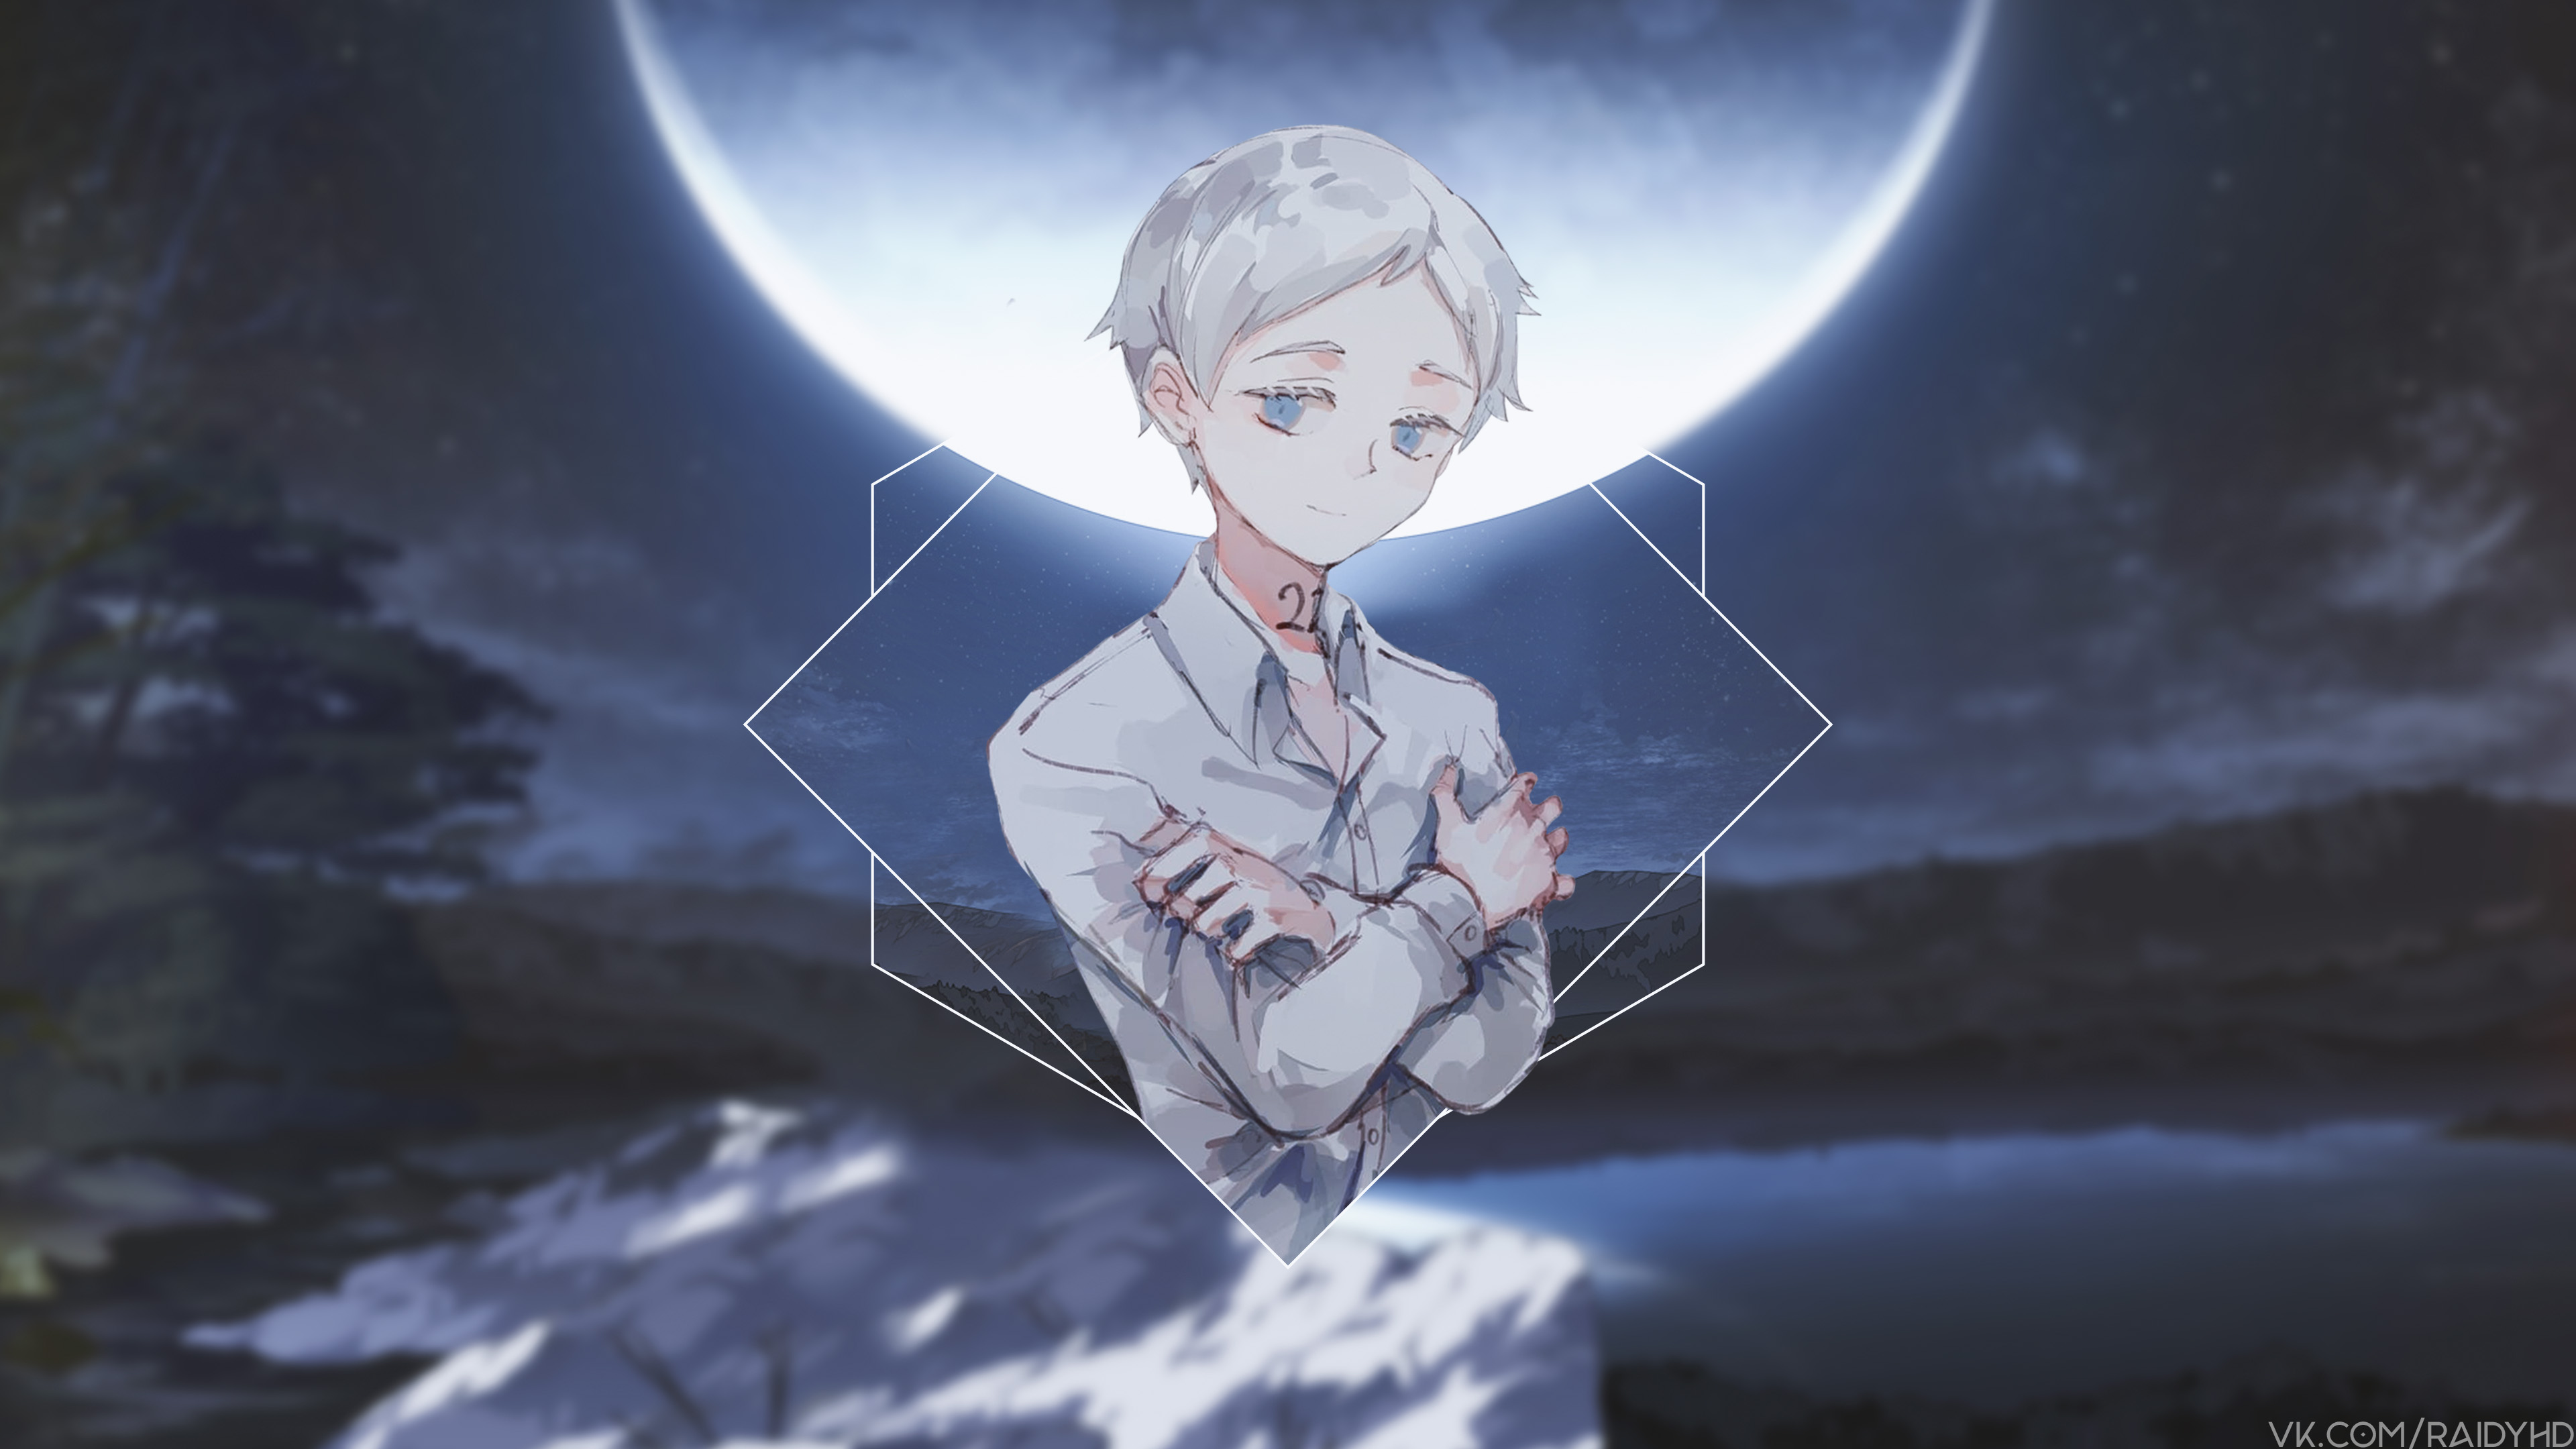 Anime 3840x2160 anime picture-in-picture Norman (The Promised Neverland) anime boys